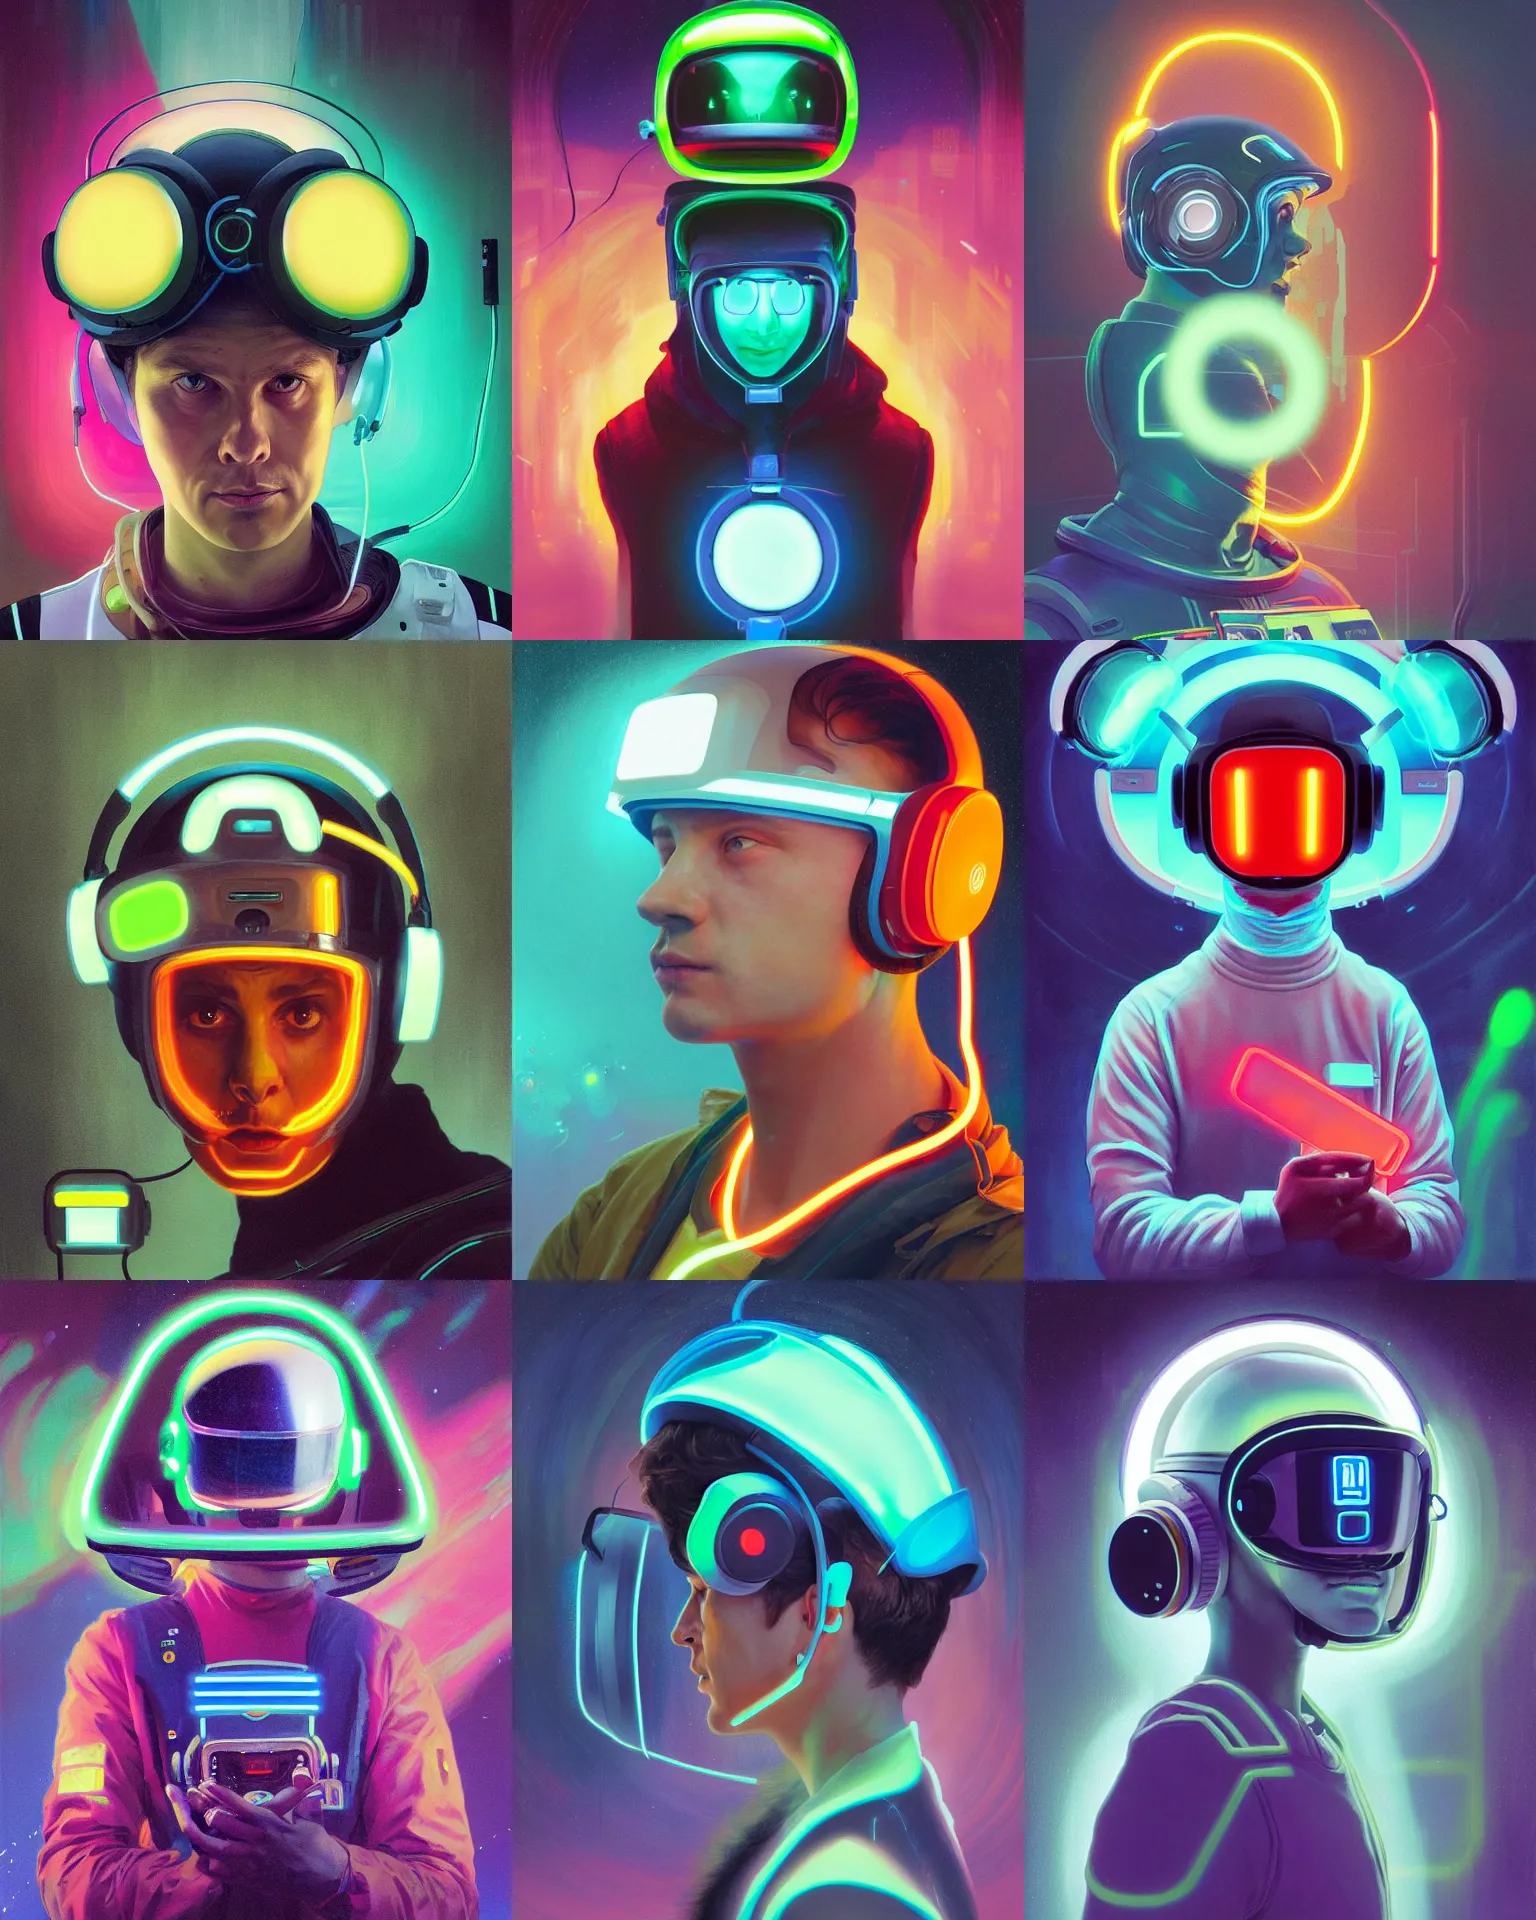 Prompt: sfam driver as a future coder looking on, glowing visor over eyes and sleek neon headphones, neon accents, bottom lighting, desaturated headshot portrait painting by dean cornwall, ilya repin, rhads, tom whalen, alex grey, alphonse mucha, donoto giancola, astronaut cyberpunk electric fashion photography